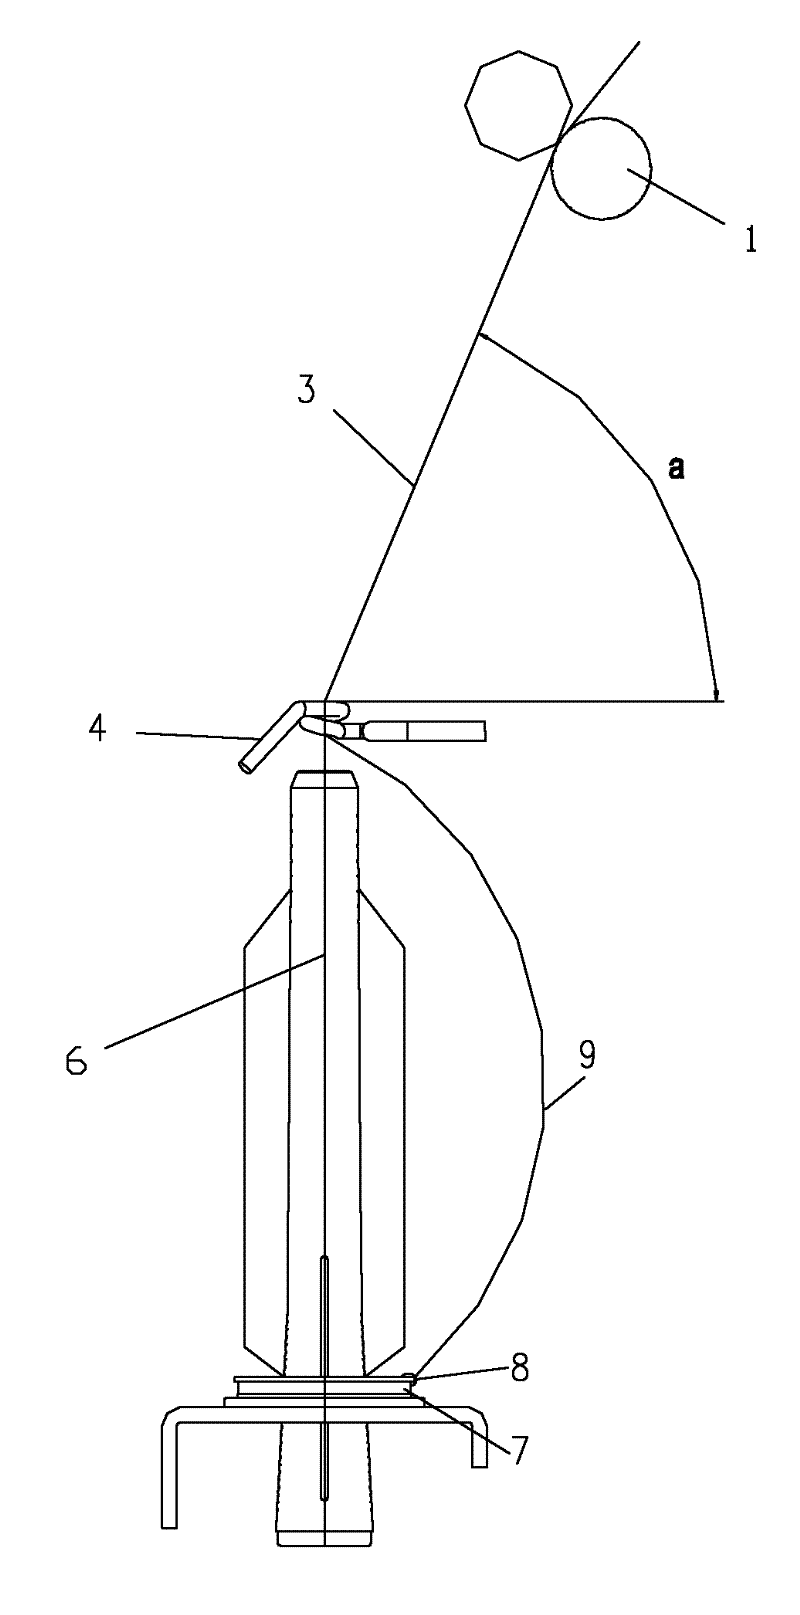 A spinning device for producing low-twist yarn